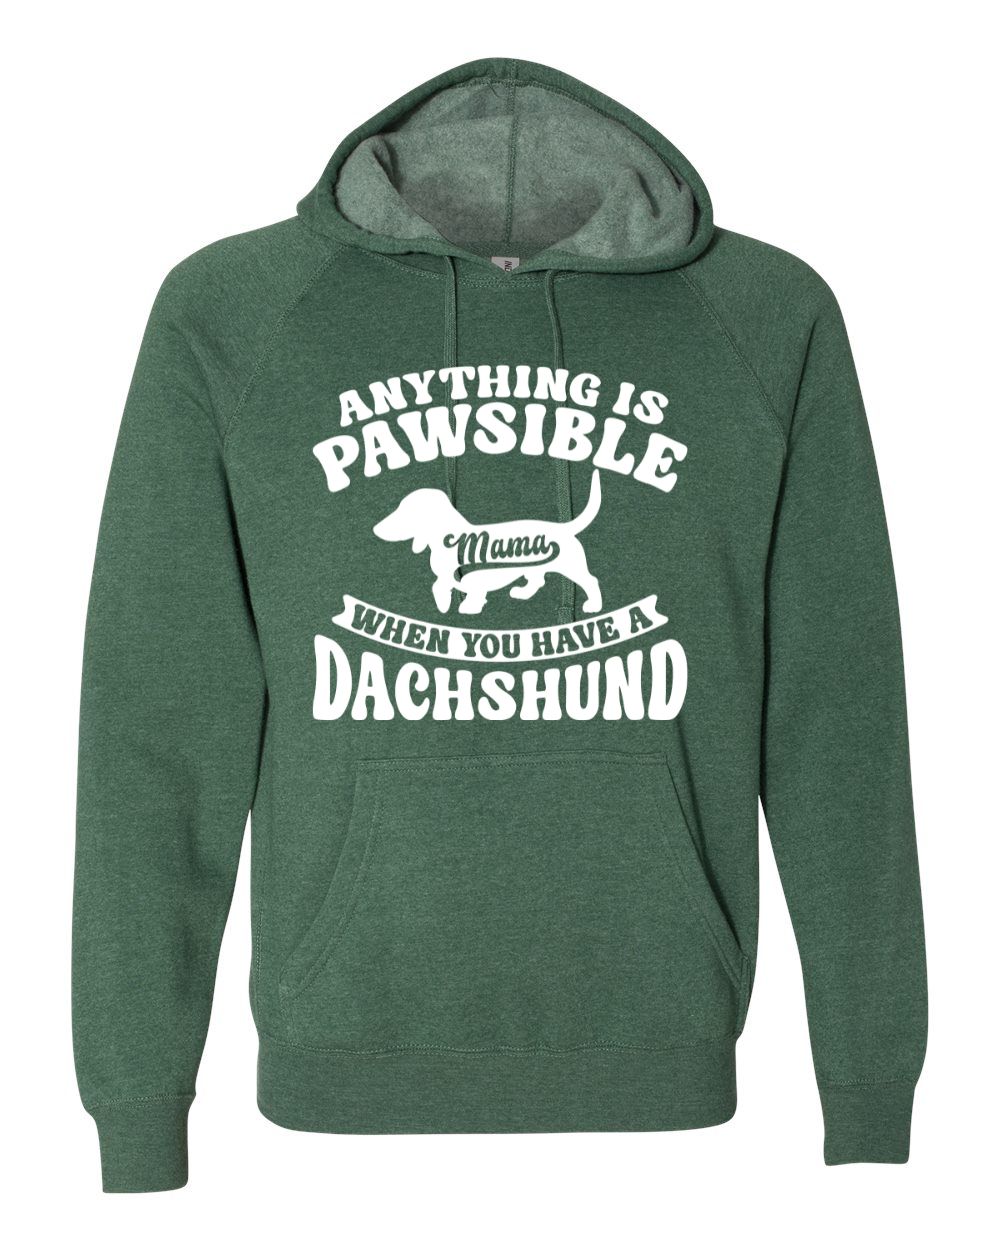 Anything Is Pawsible Hoodie